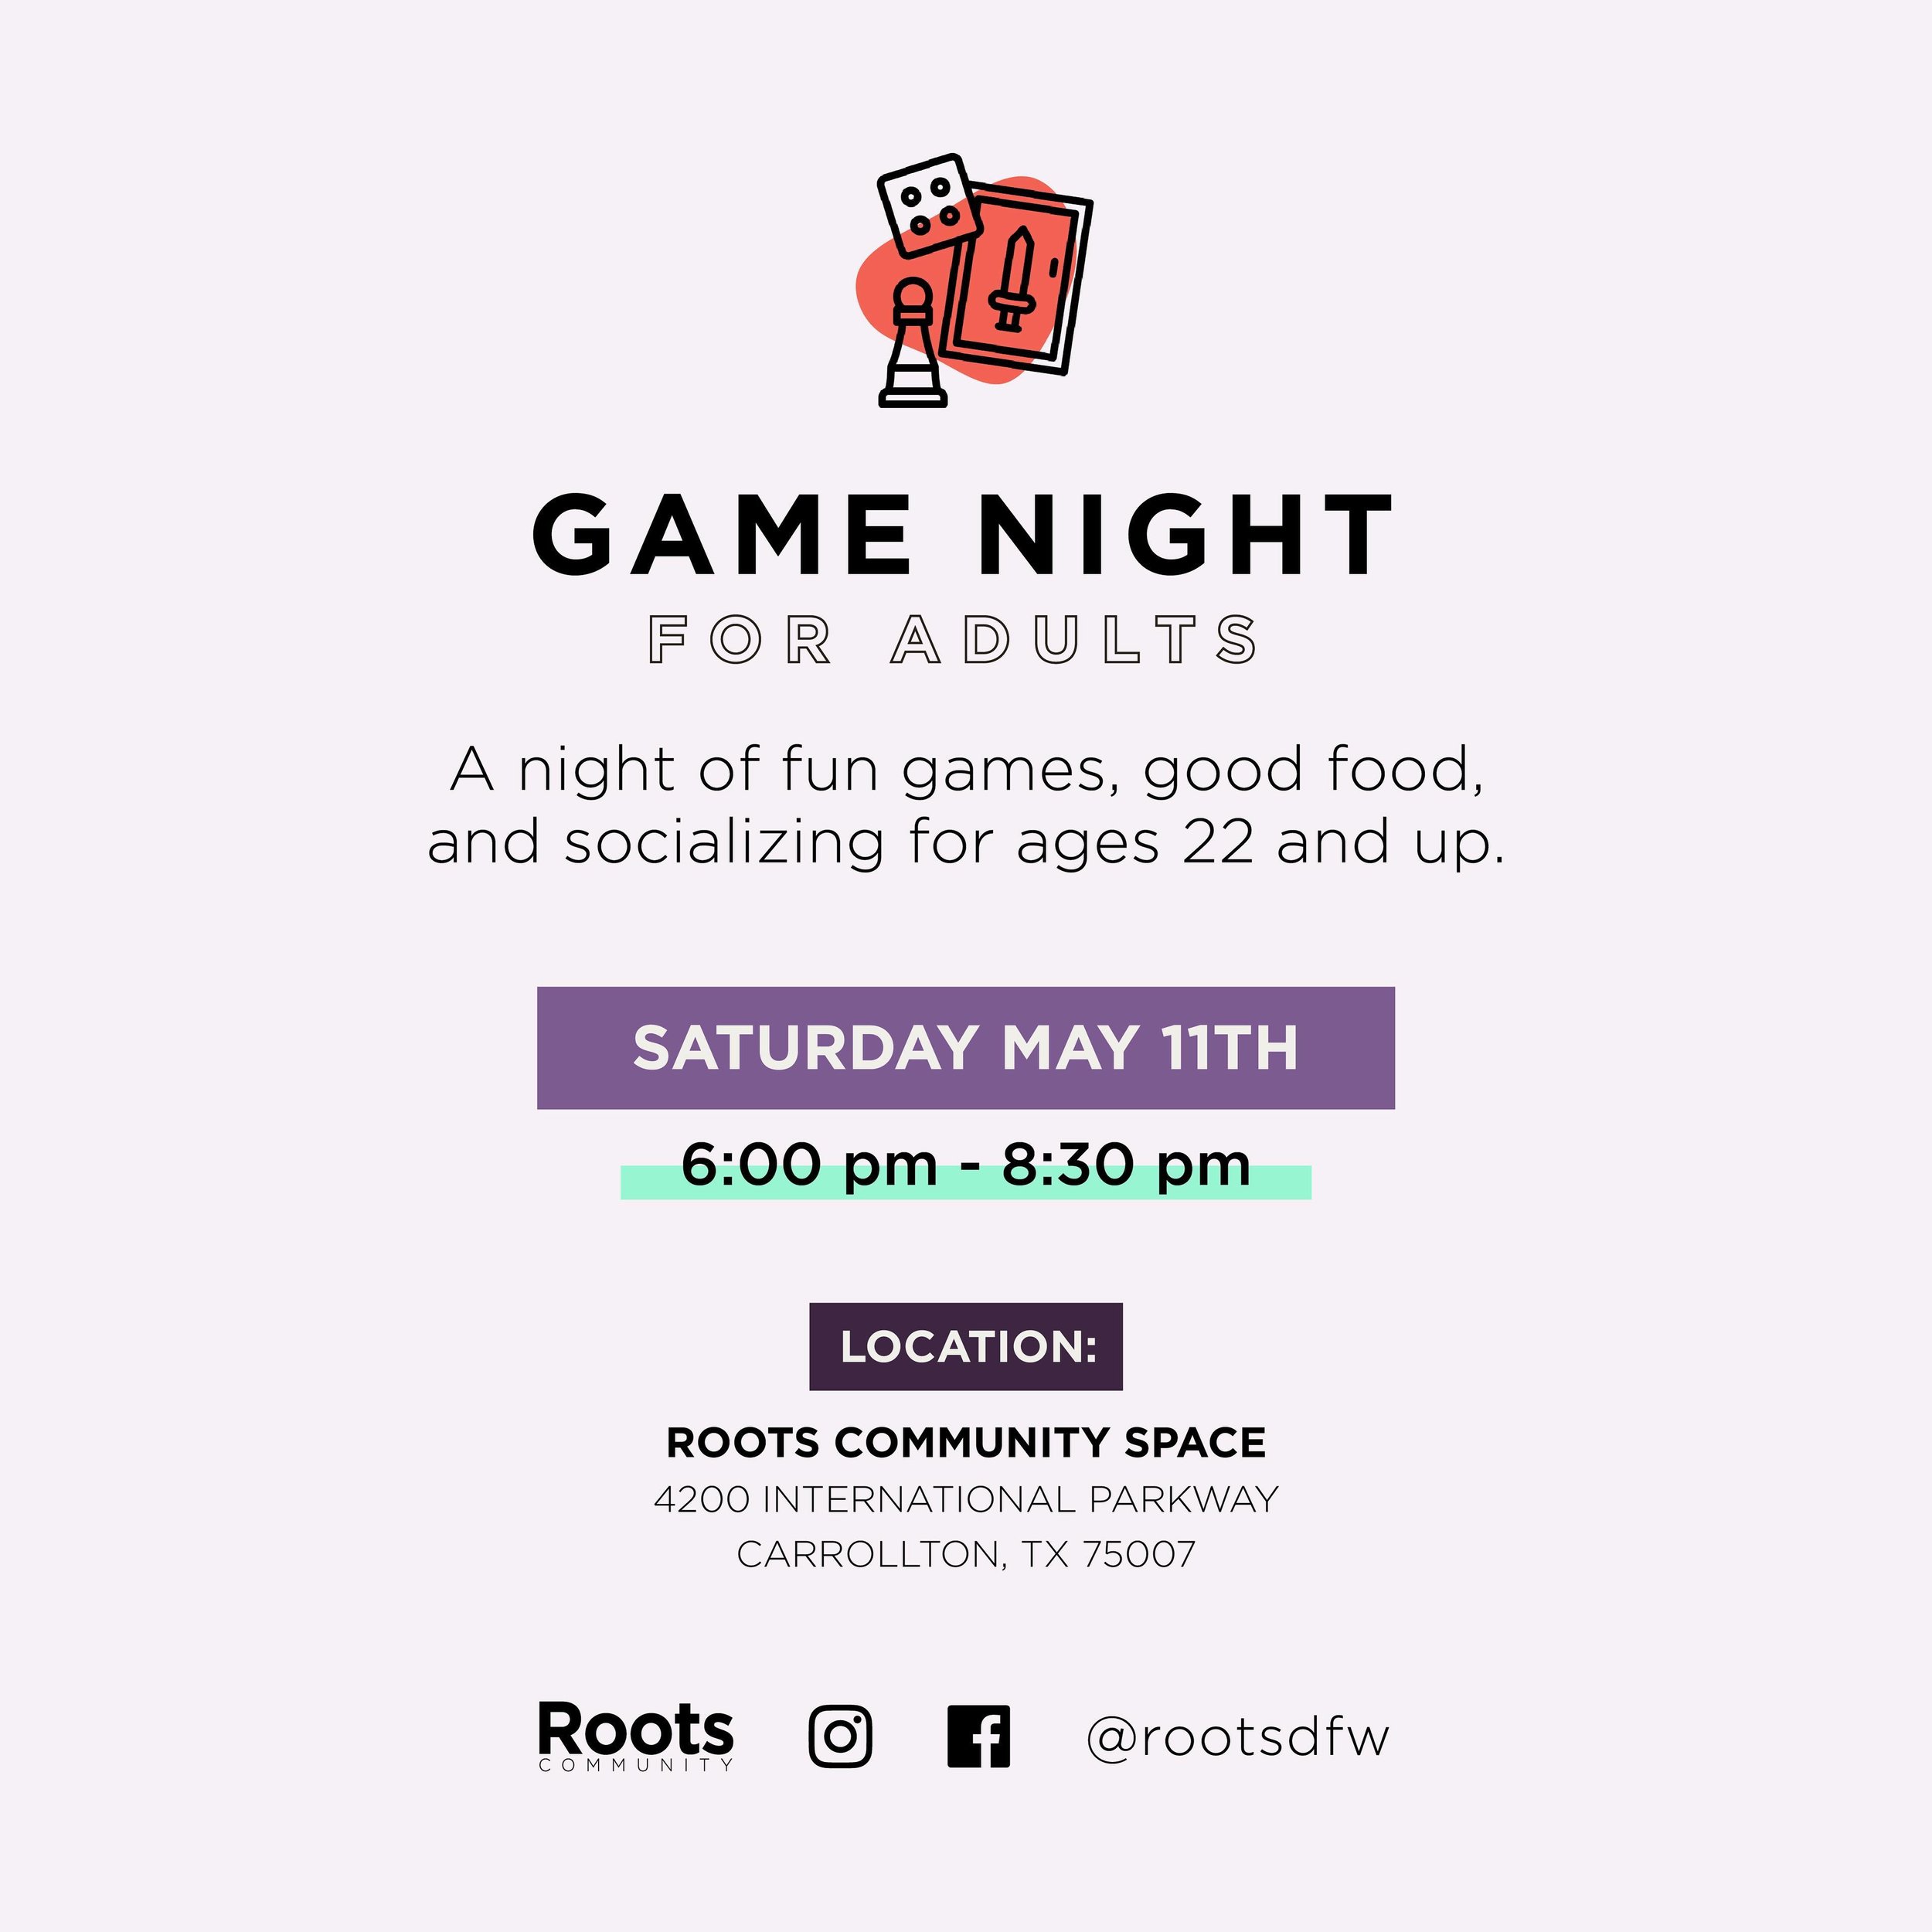 We have a great opportunity for our adult community at Roots on Friday evening! Join us for a game night for our 22+ demographic with individual and team games and an evening of community building! See y&rsquo;all there iA.